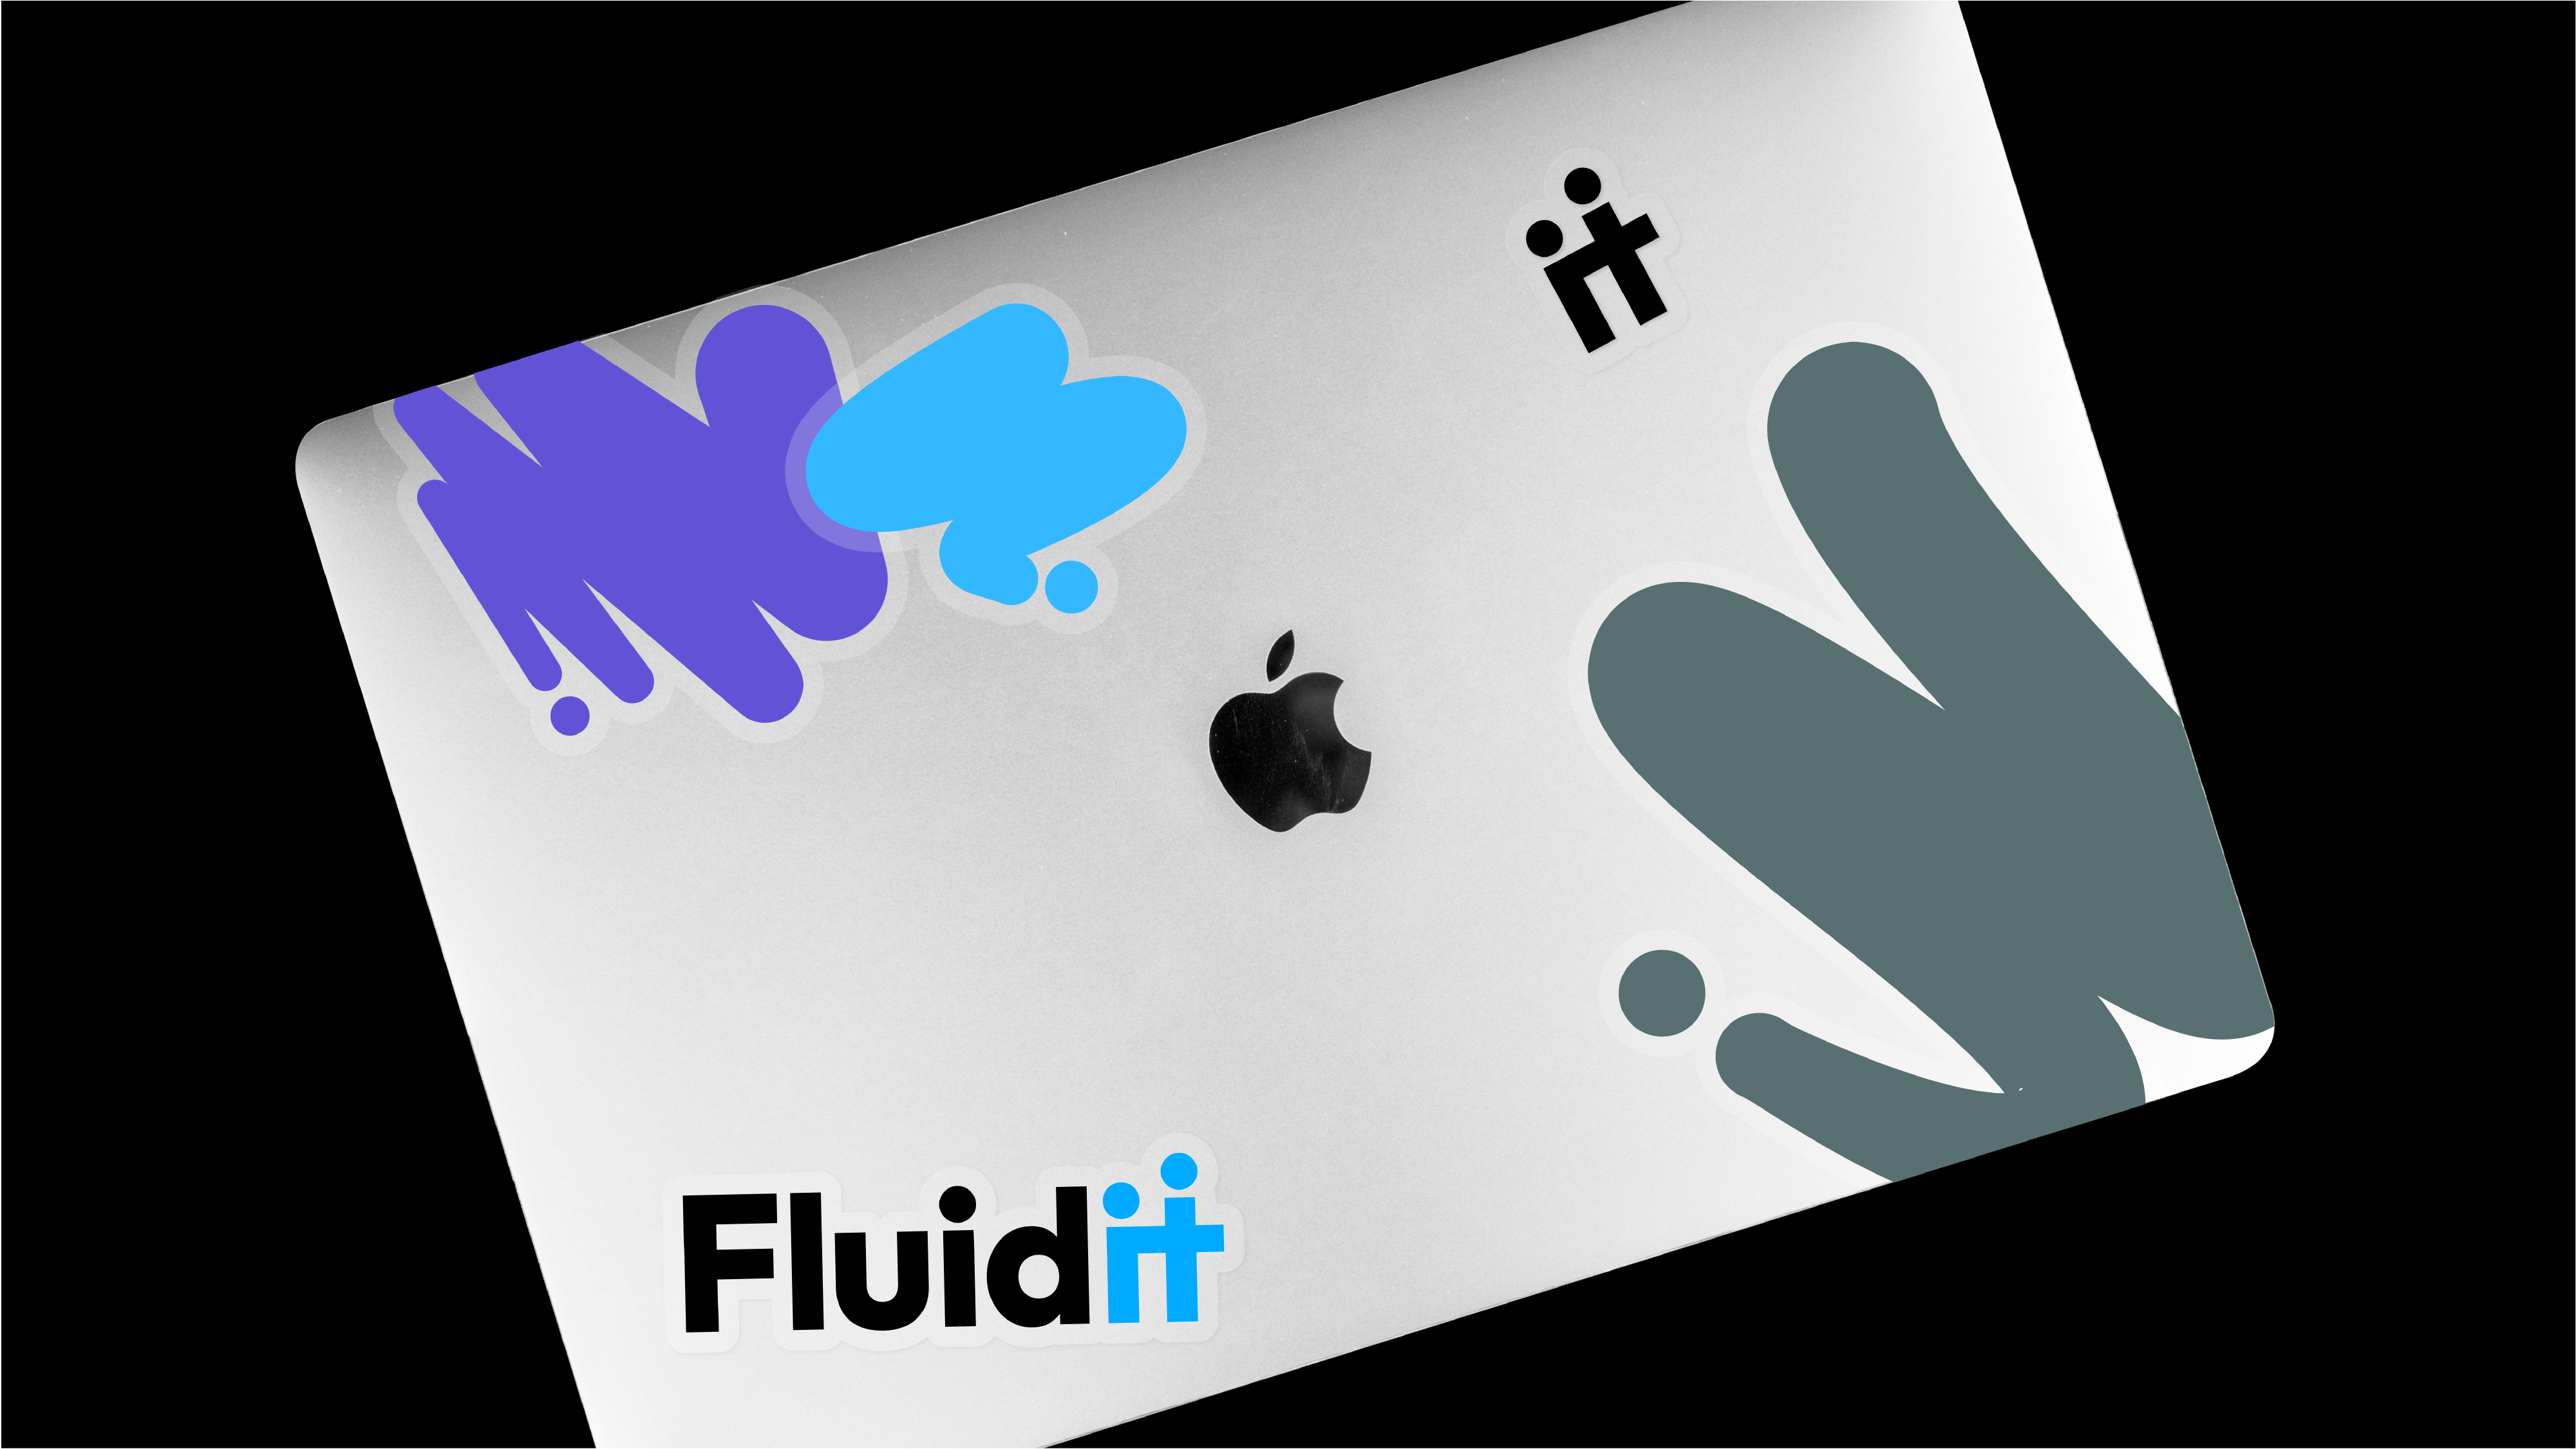 FluidIT - An IT firm on a mission